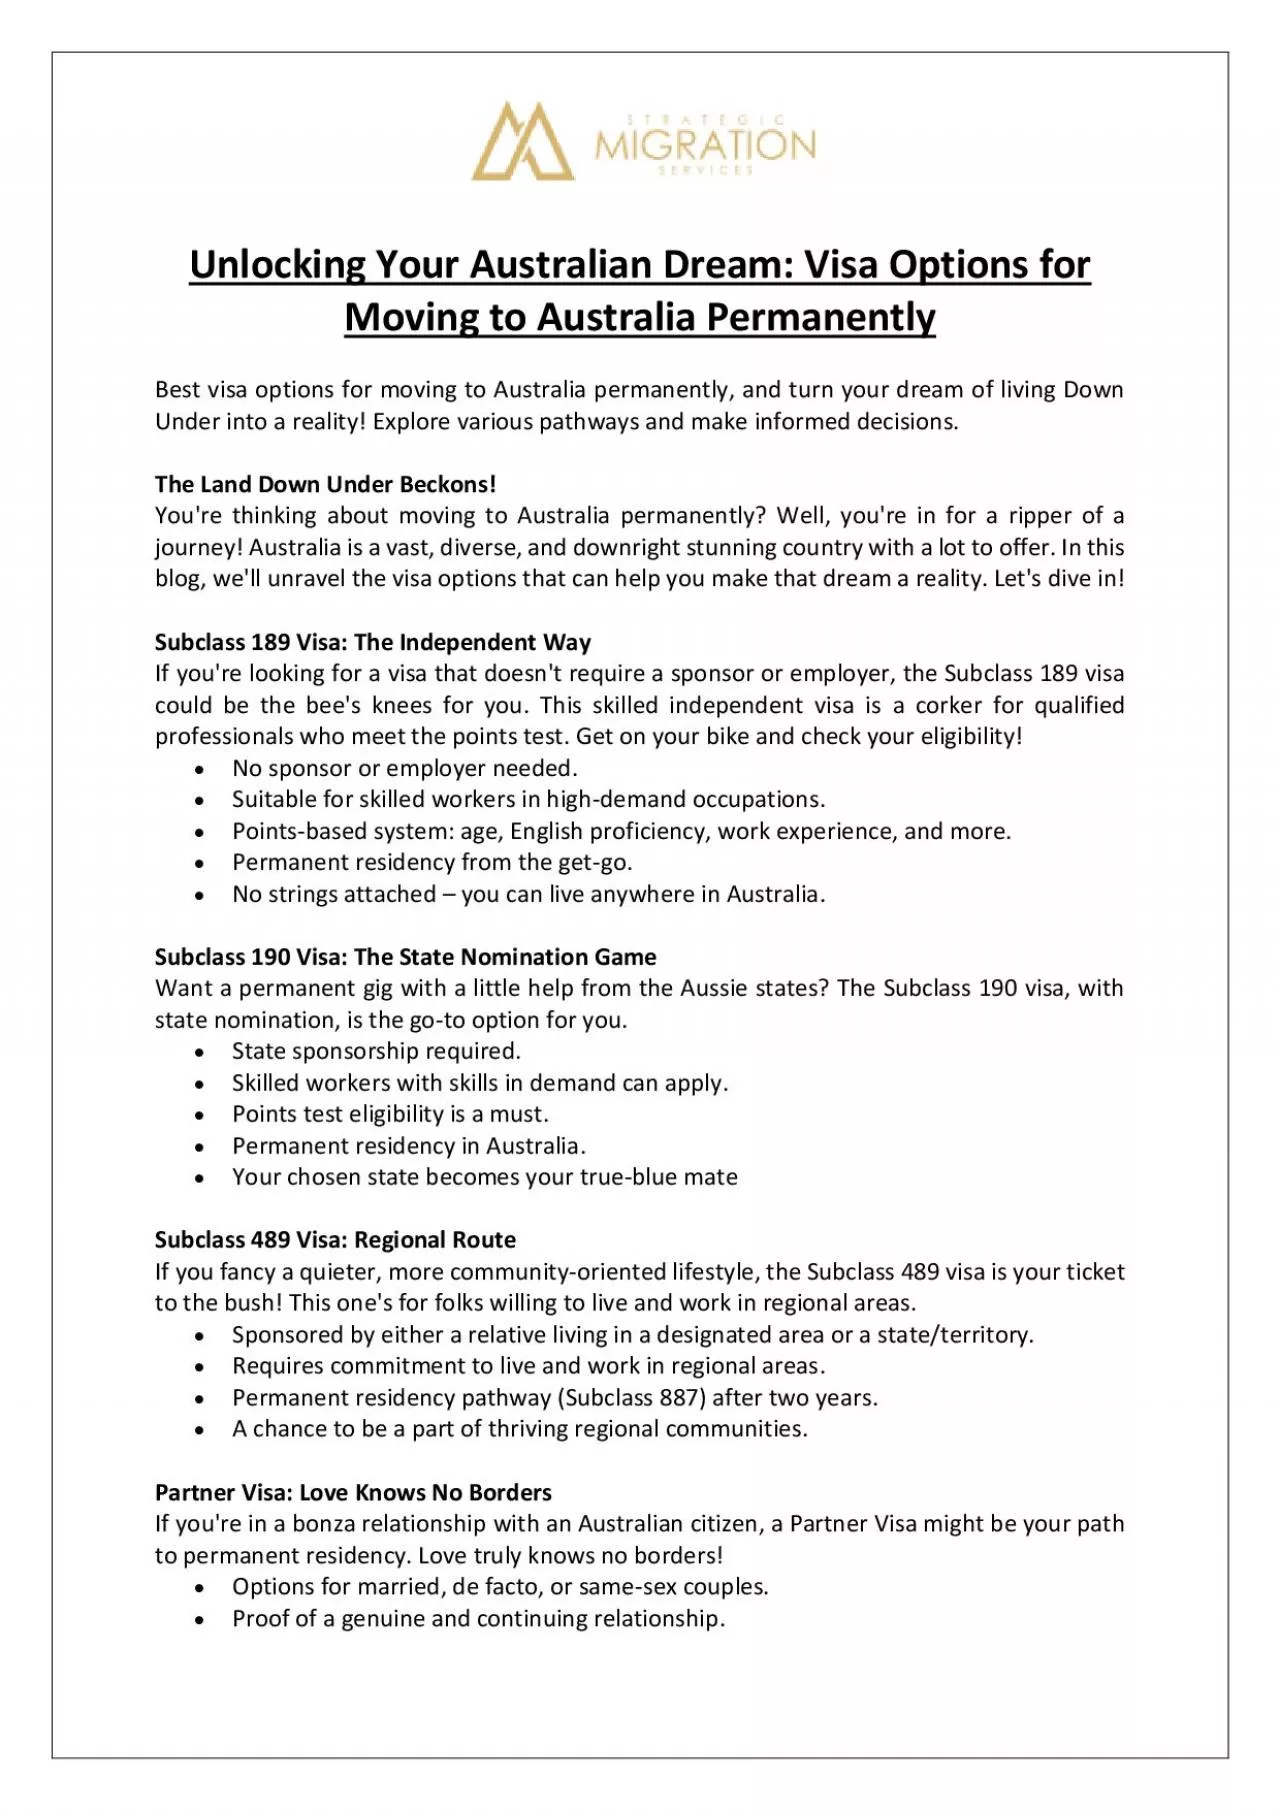 Visa Options for Moving to Australia Permanently